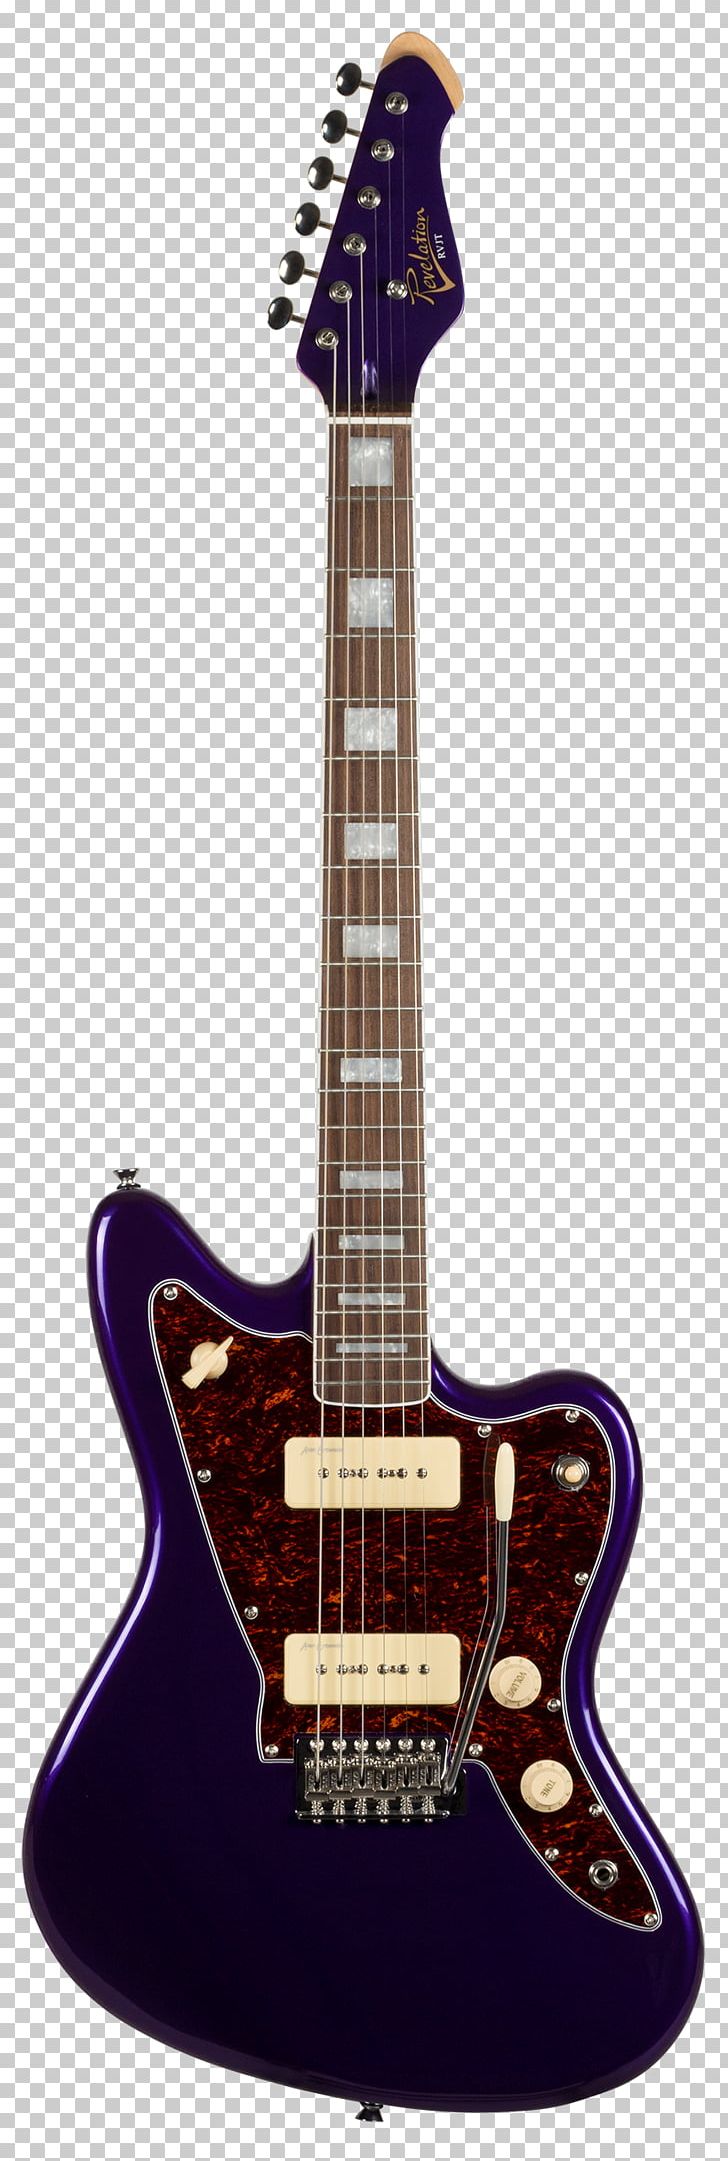 Electric Guitar Sunburst Bass Guitar Fender Musical Instruments Corporation PNG, Clipart, Acoustic Electric Guitar, Acoustic Guitar, Bass Guitar, Guitar, Guitar Accessory Free PNG Download